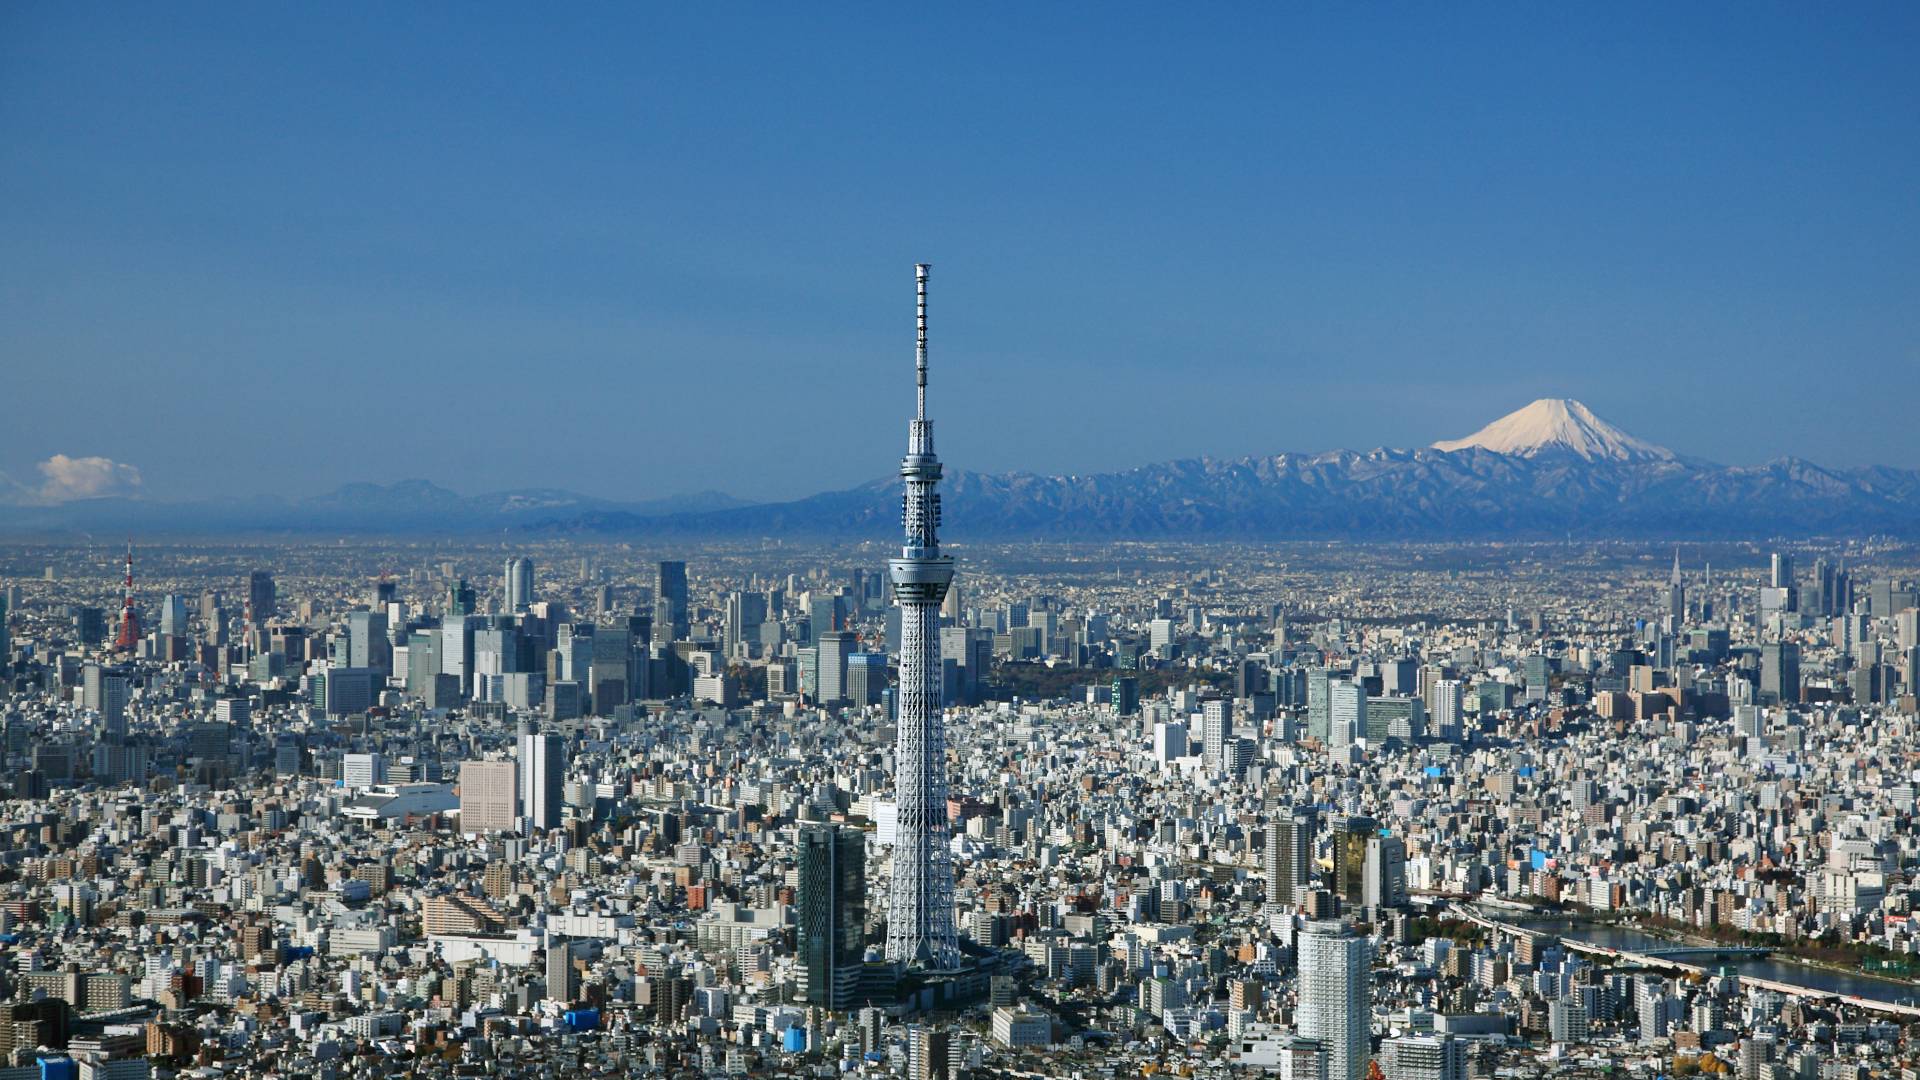 Skytree & Around. The Official Tokyo Travel Guide, GO TOKYO